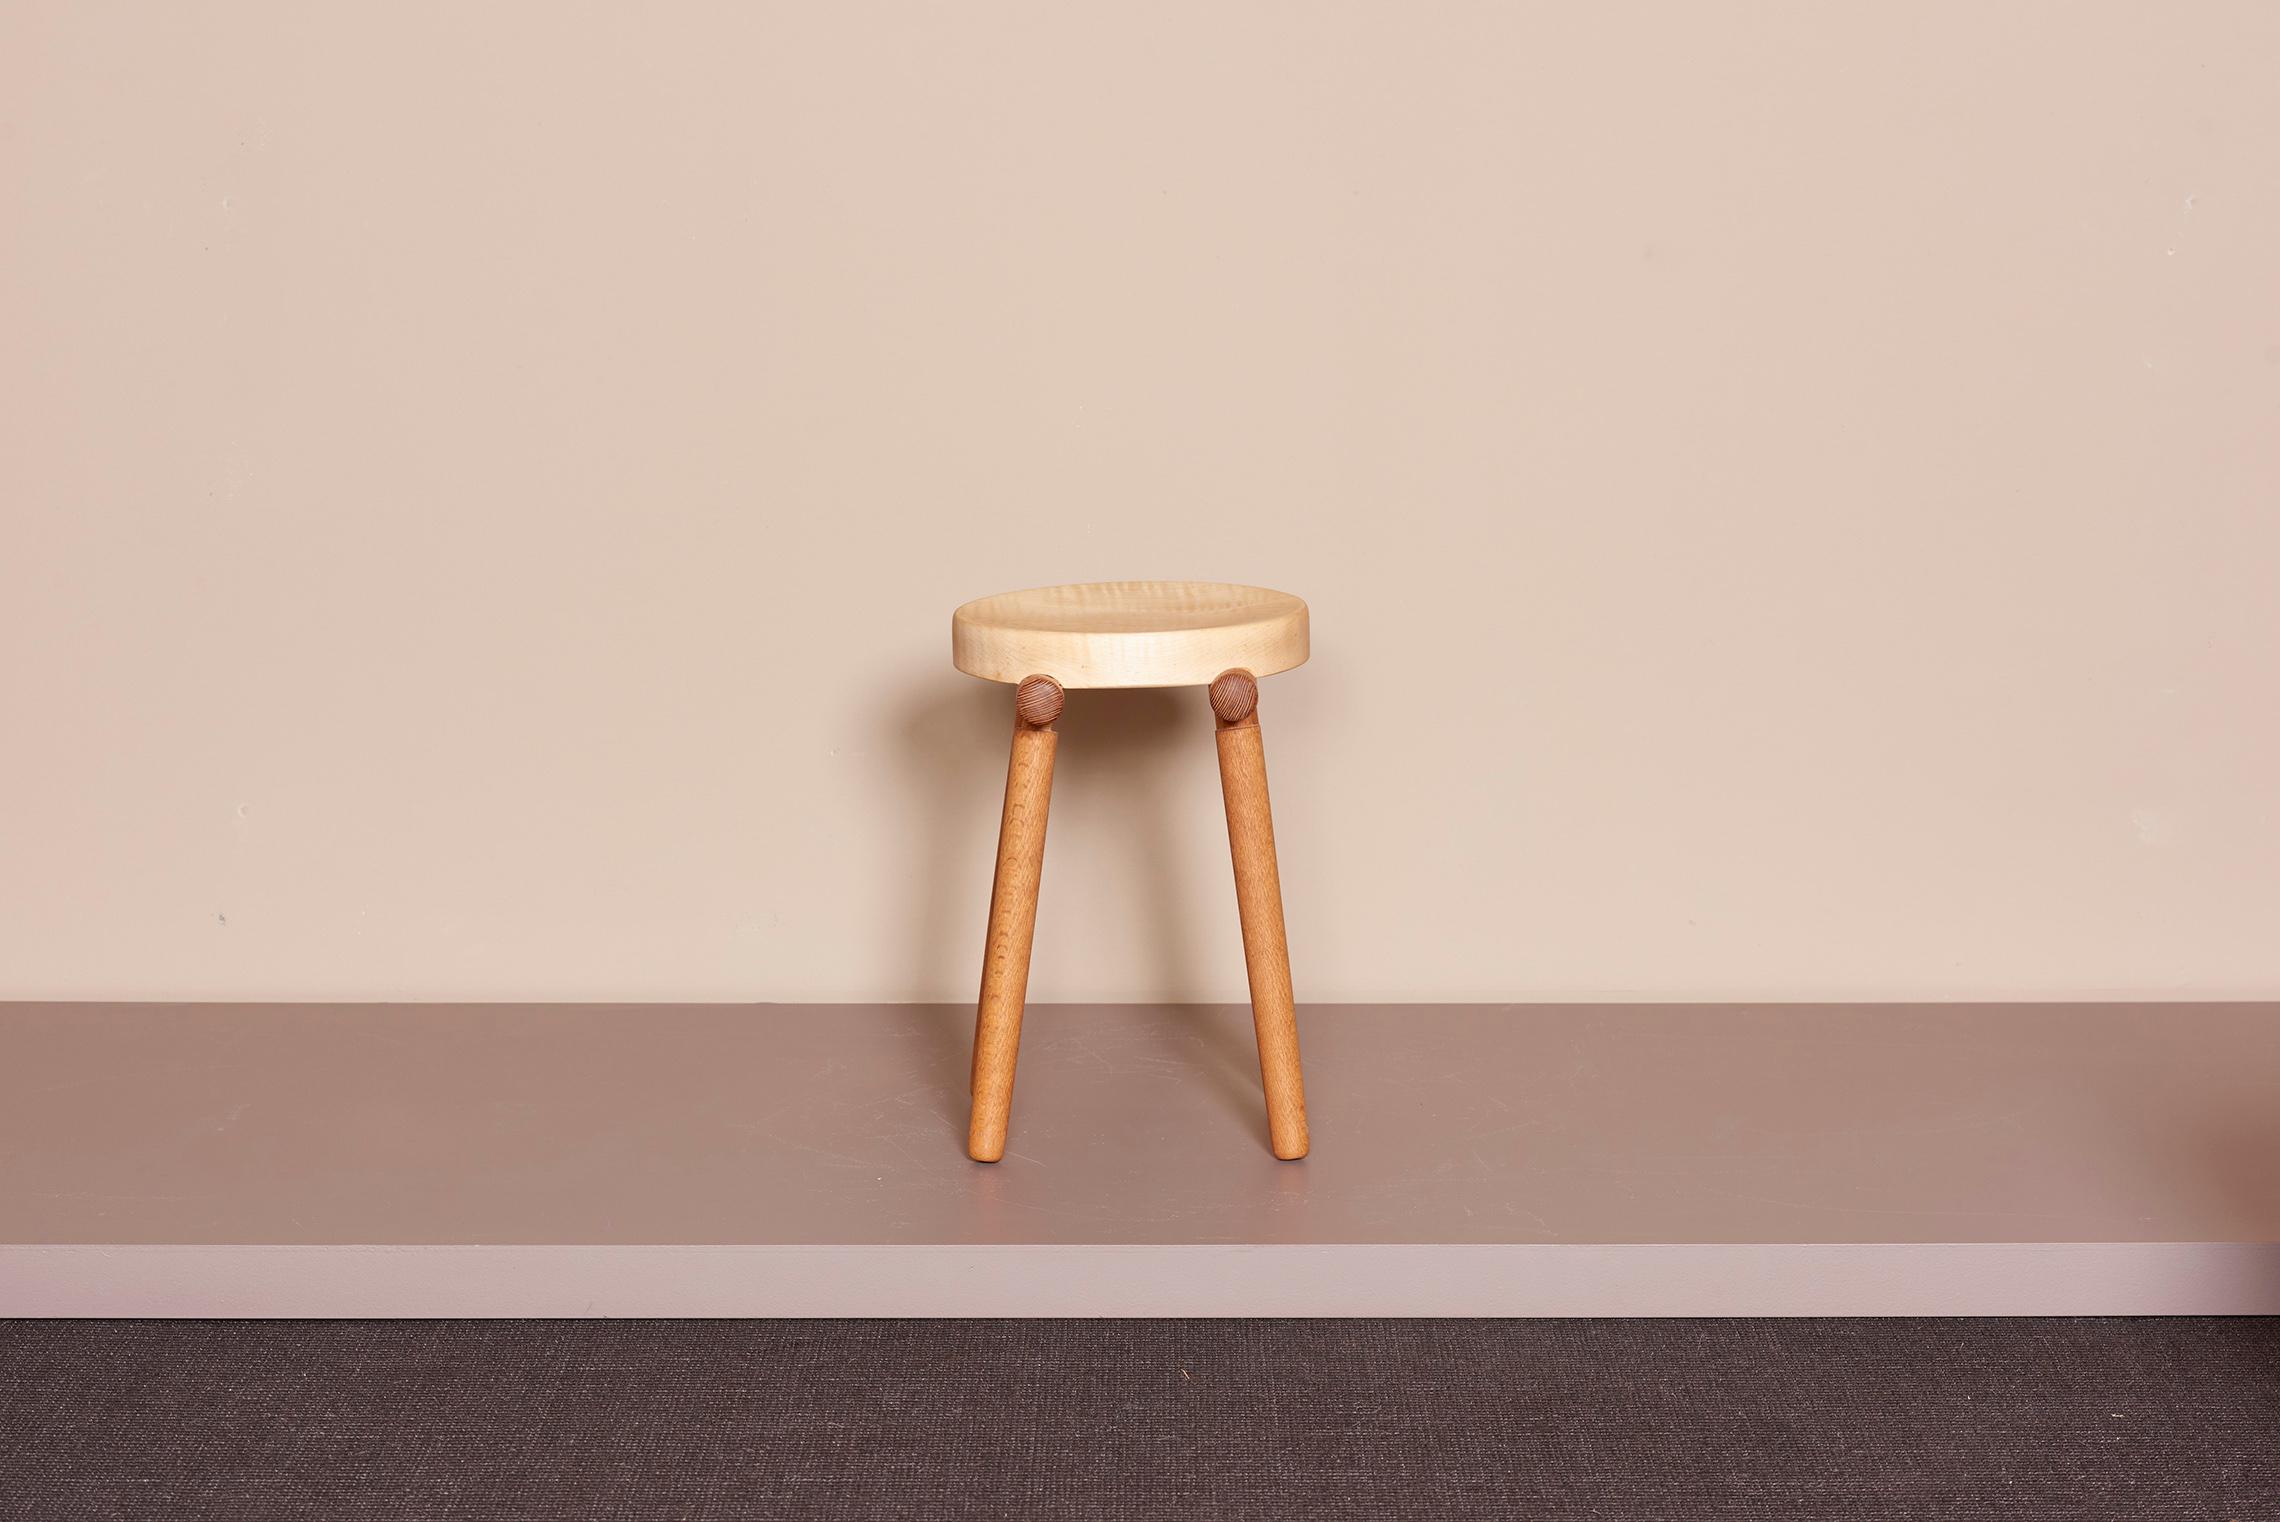 Stool by Ohio Craftsmen Michael Rozell, USA 2021
Studio stools by Michael Rozell with a figured maple wood top and Lace Wood legs, USA, 2020.